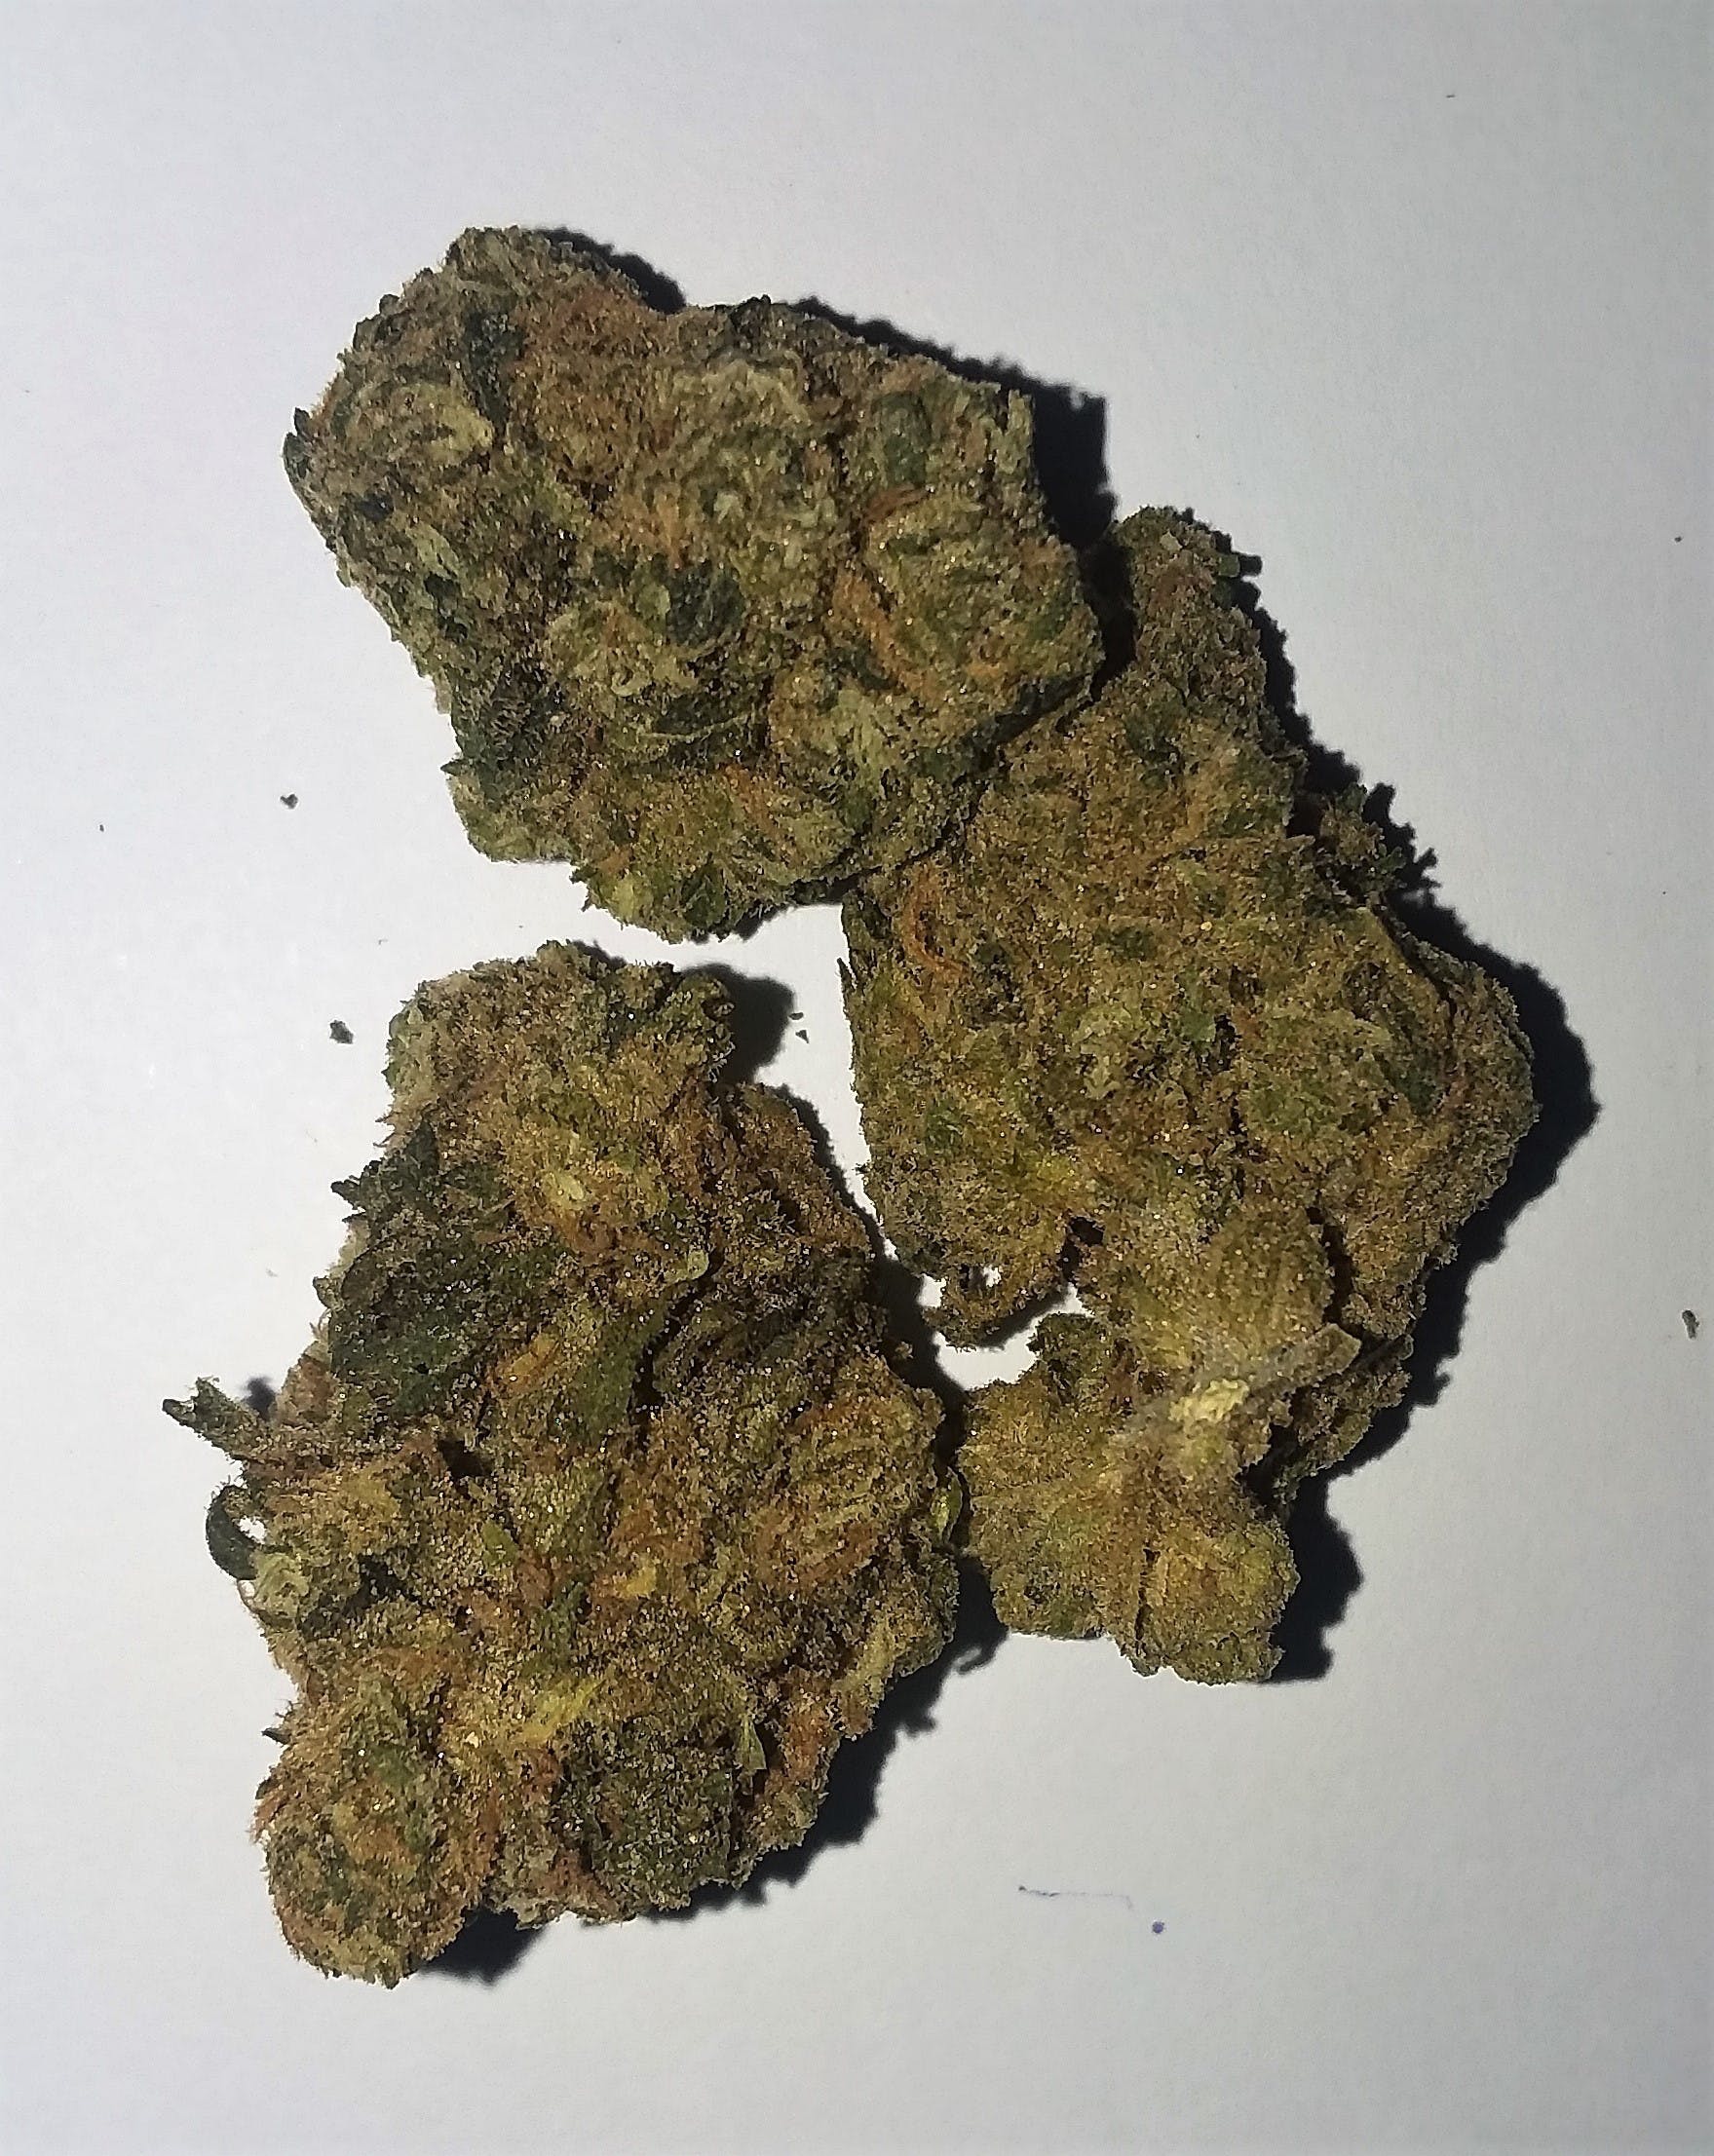 marijuana-dispensaries-by-appointment-only-2c-call-to-verify-fresno-berry-og-24120-ounce-special